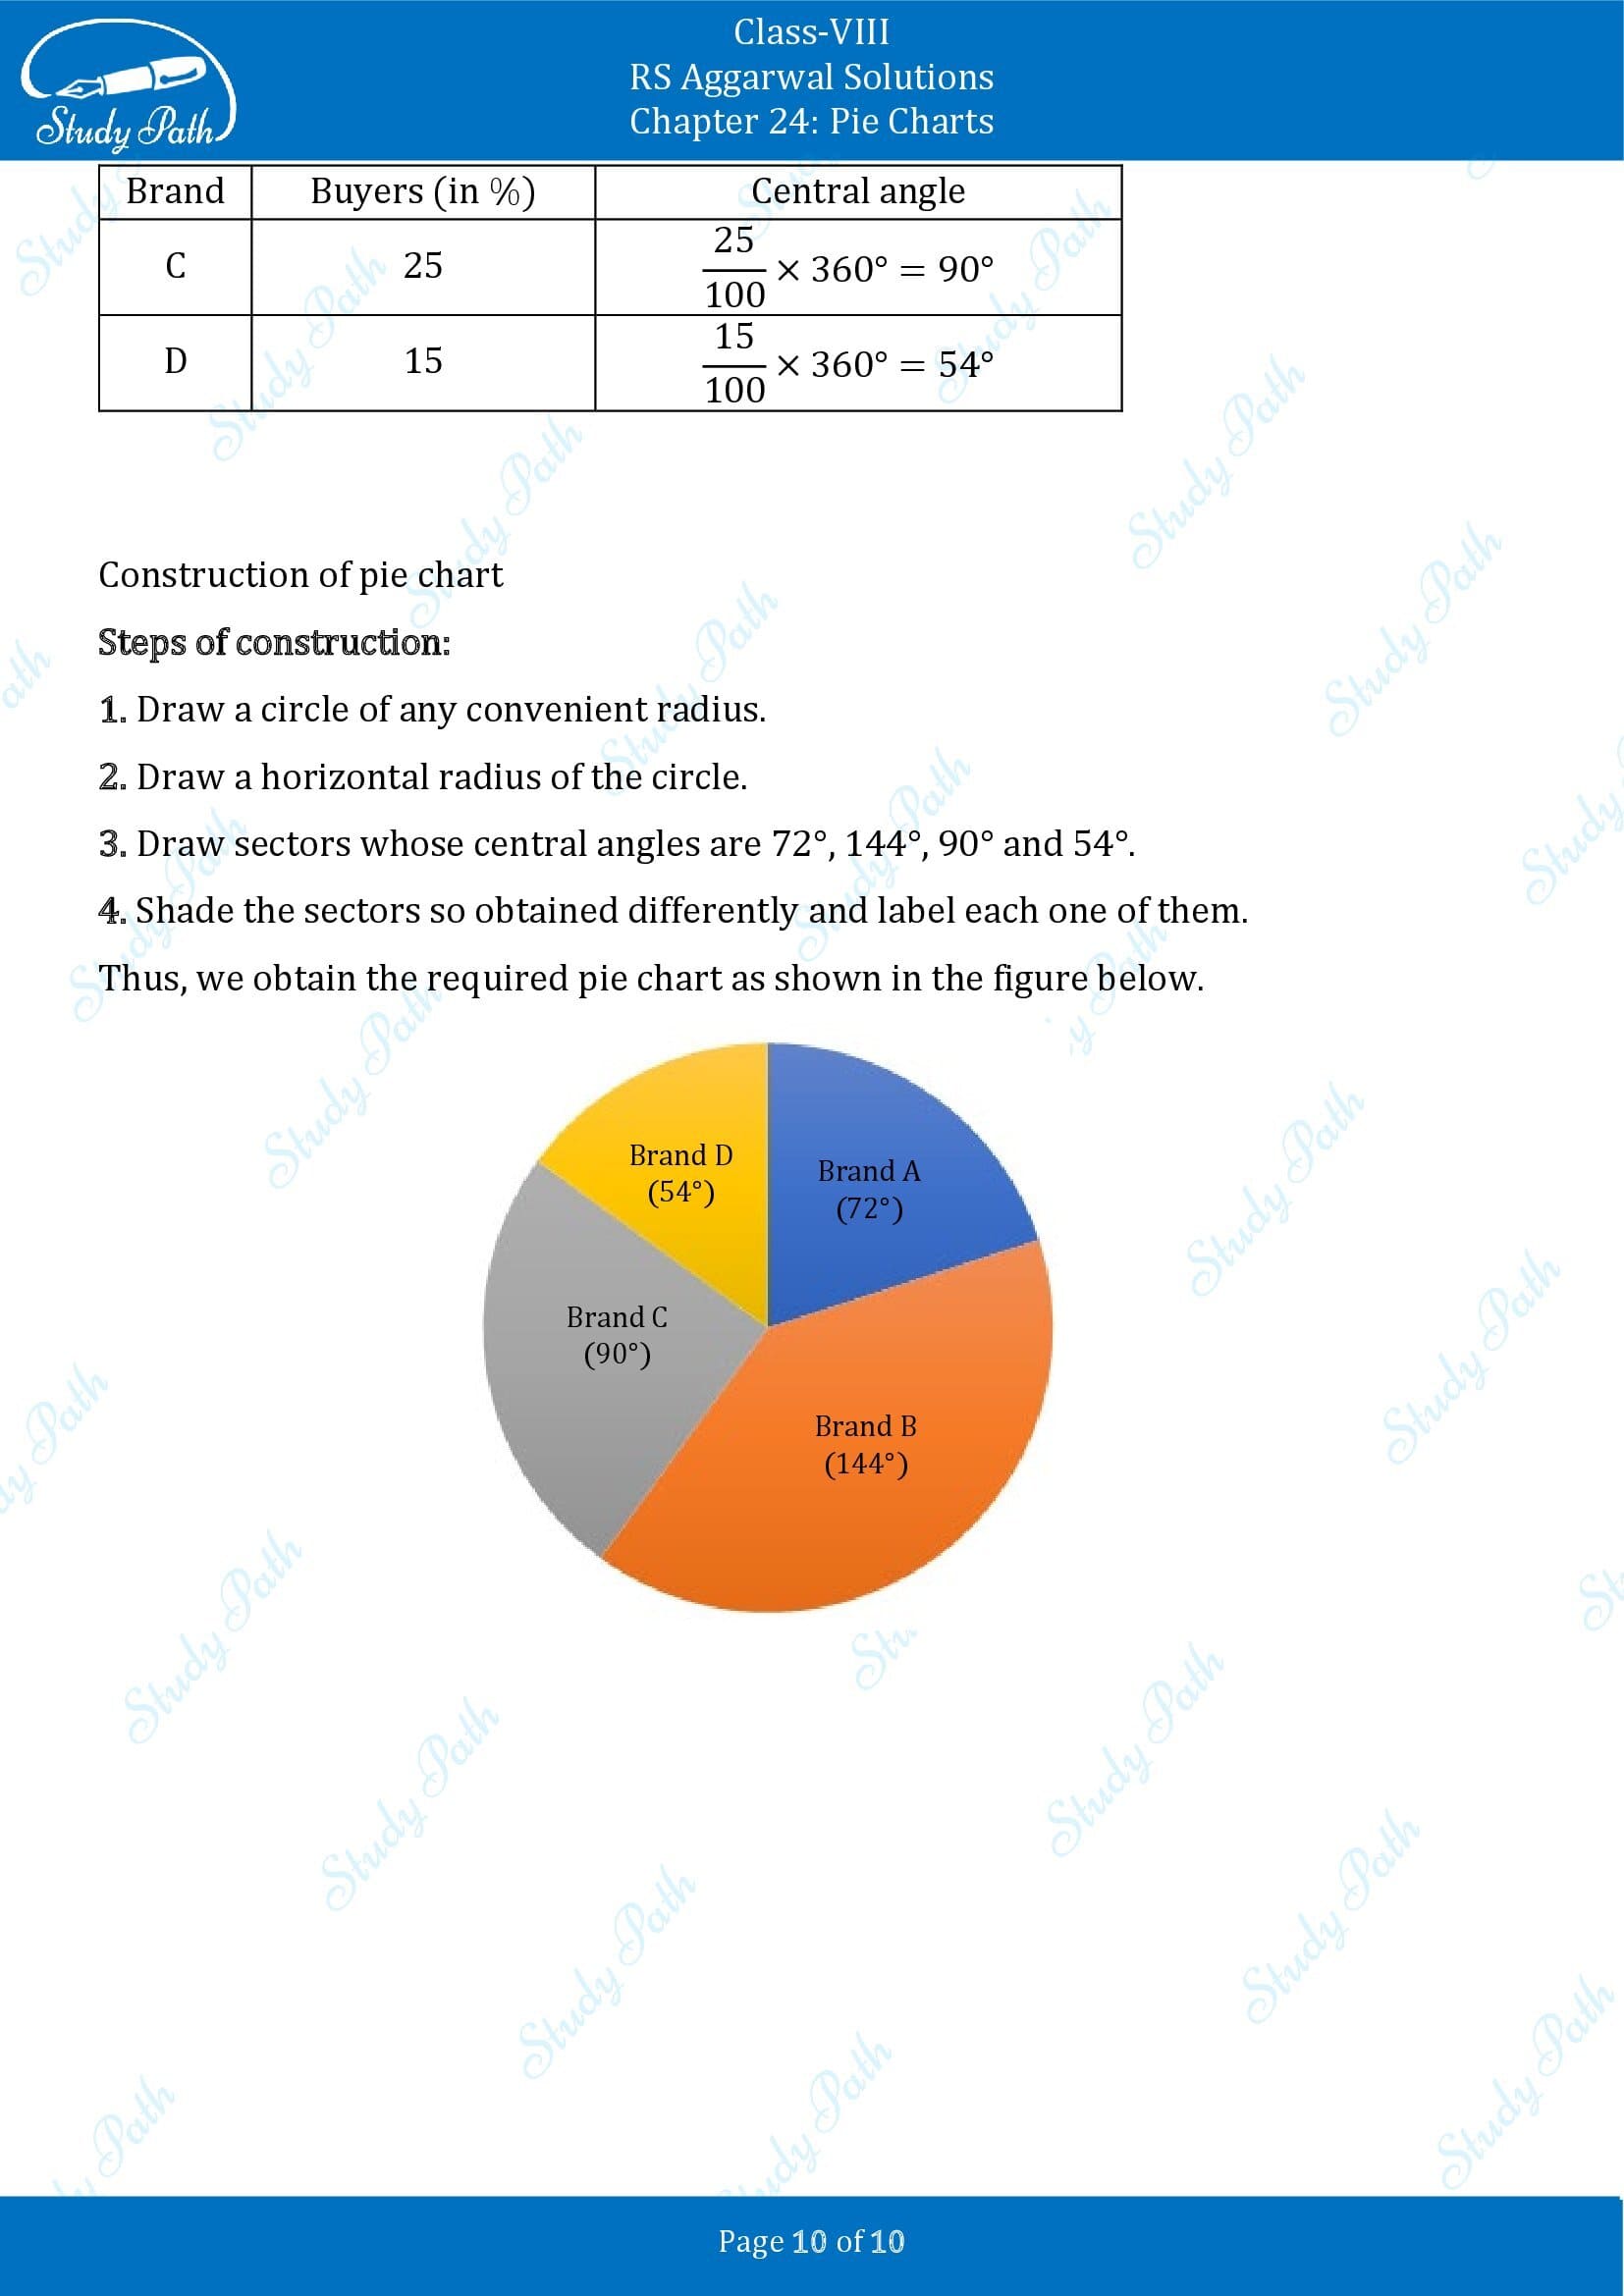 RS Aggarwal Solutions Class 8 Chapter 24 Pie Charts Exercise 24A 00010